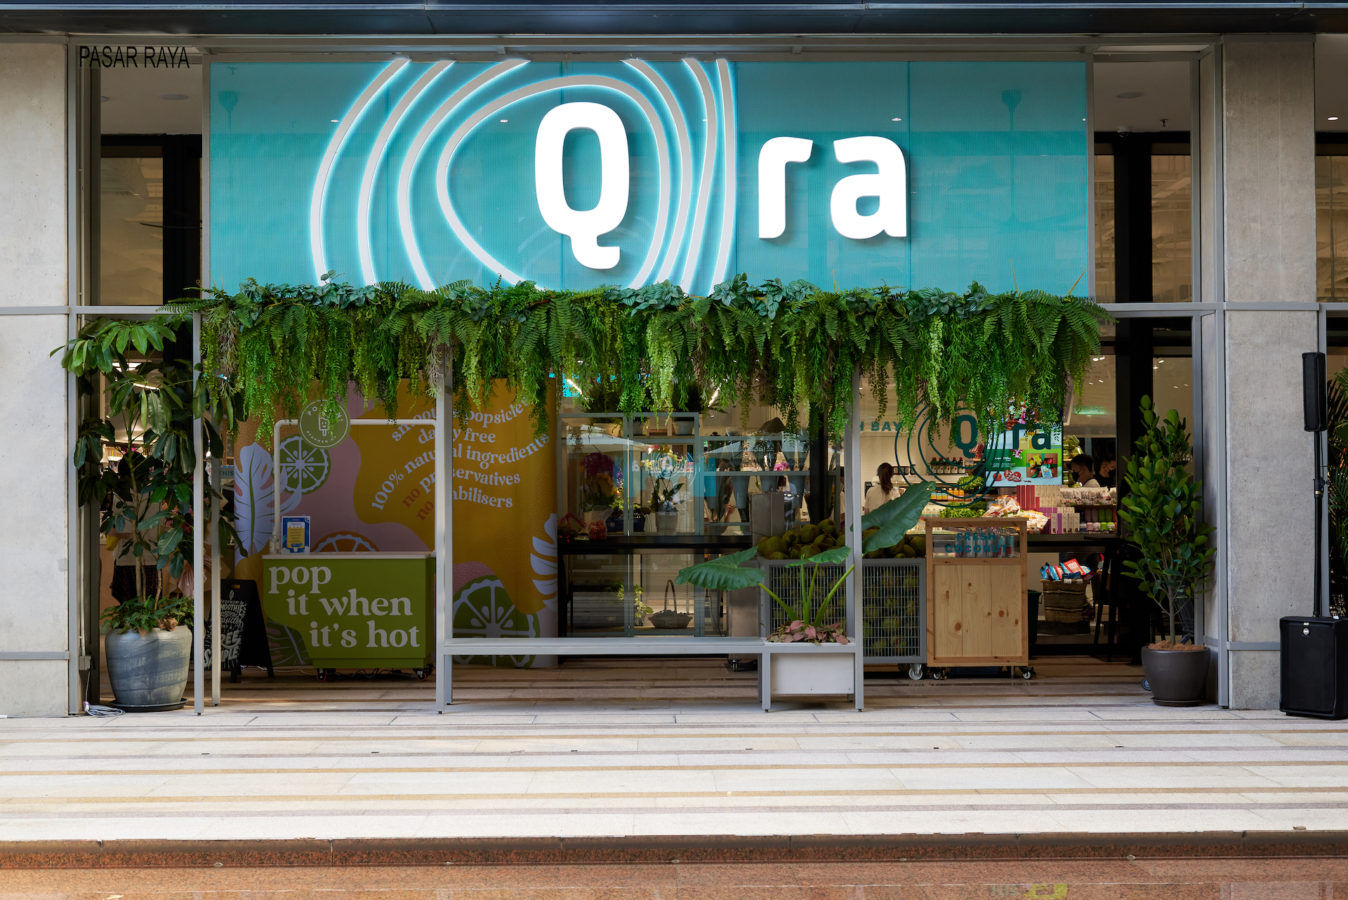 Qra supermarket expands with third outlet at Arcoris, Mont Kiara